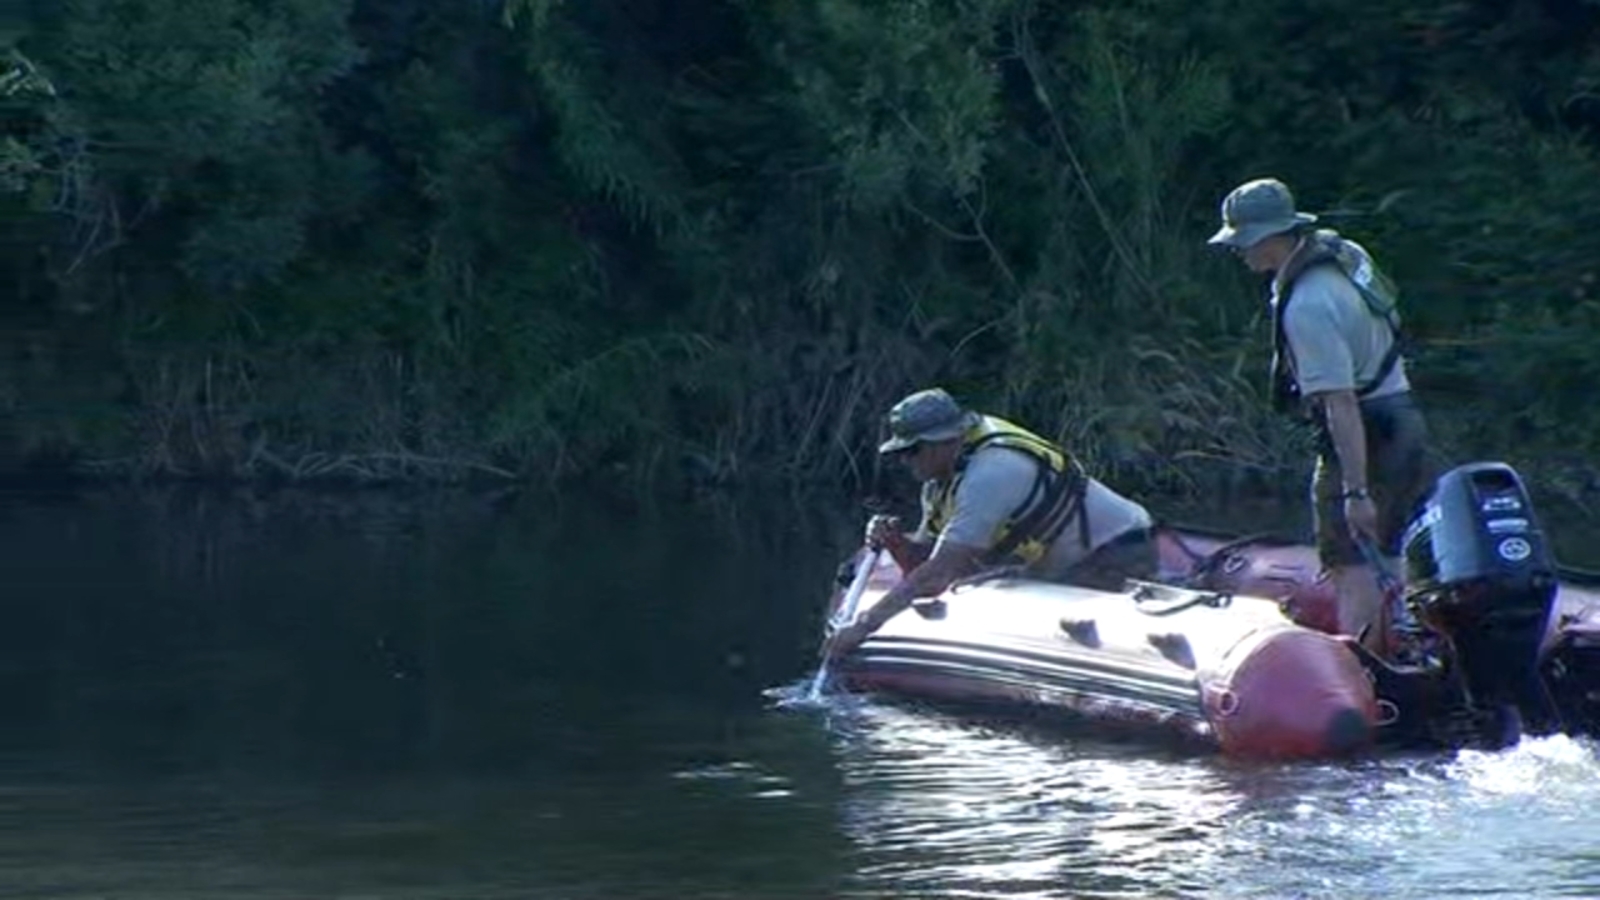 1 dead, 2 hospitalized after water rescue effort at Skaggs Bridge Park in Fresno County [Video]